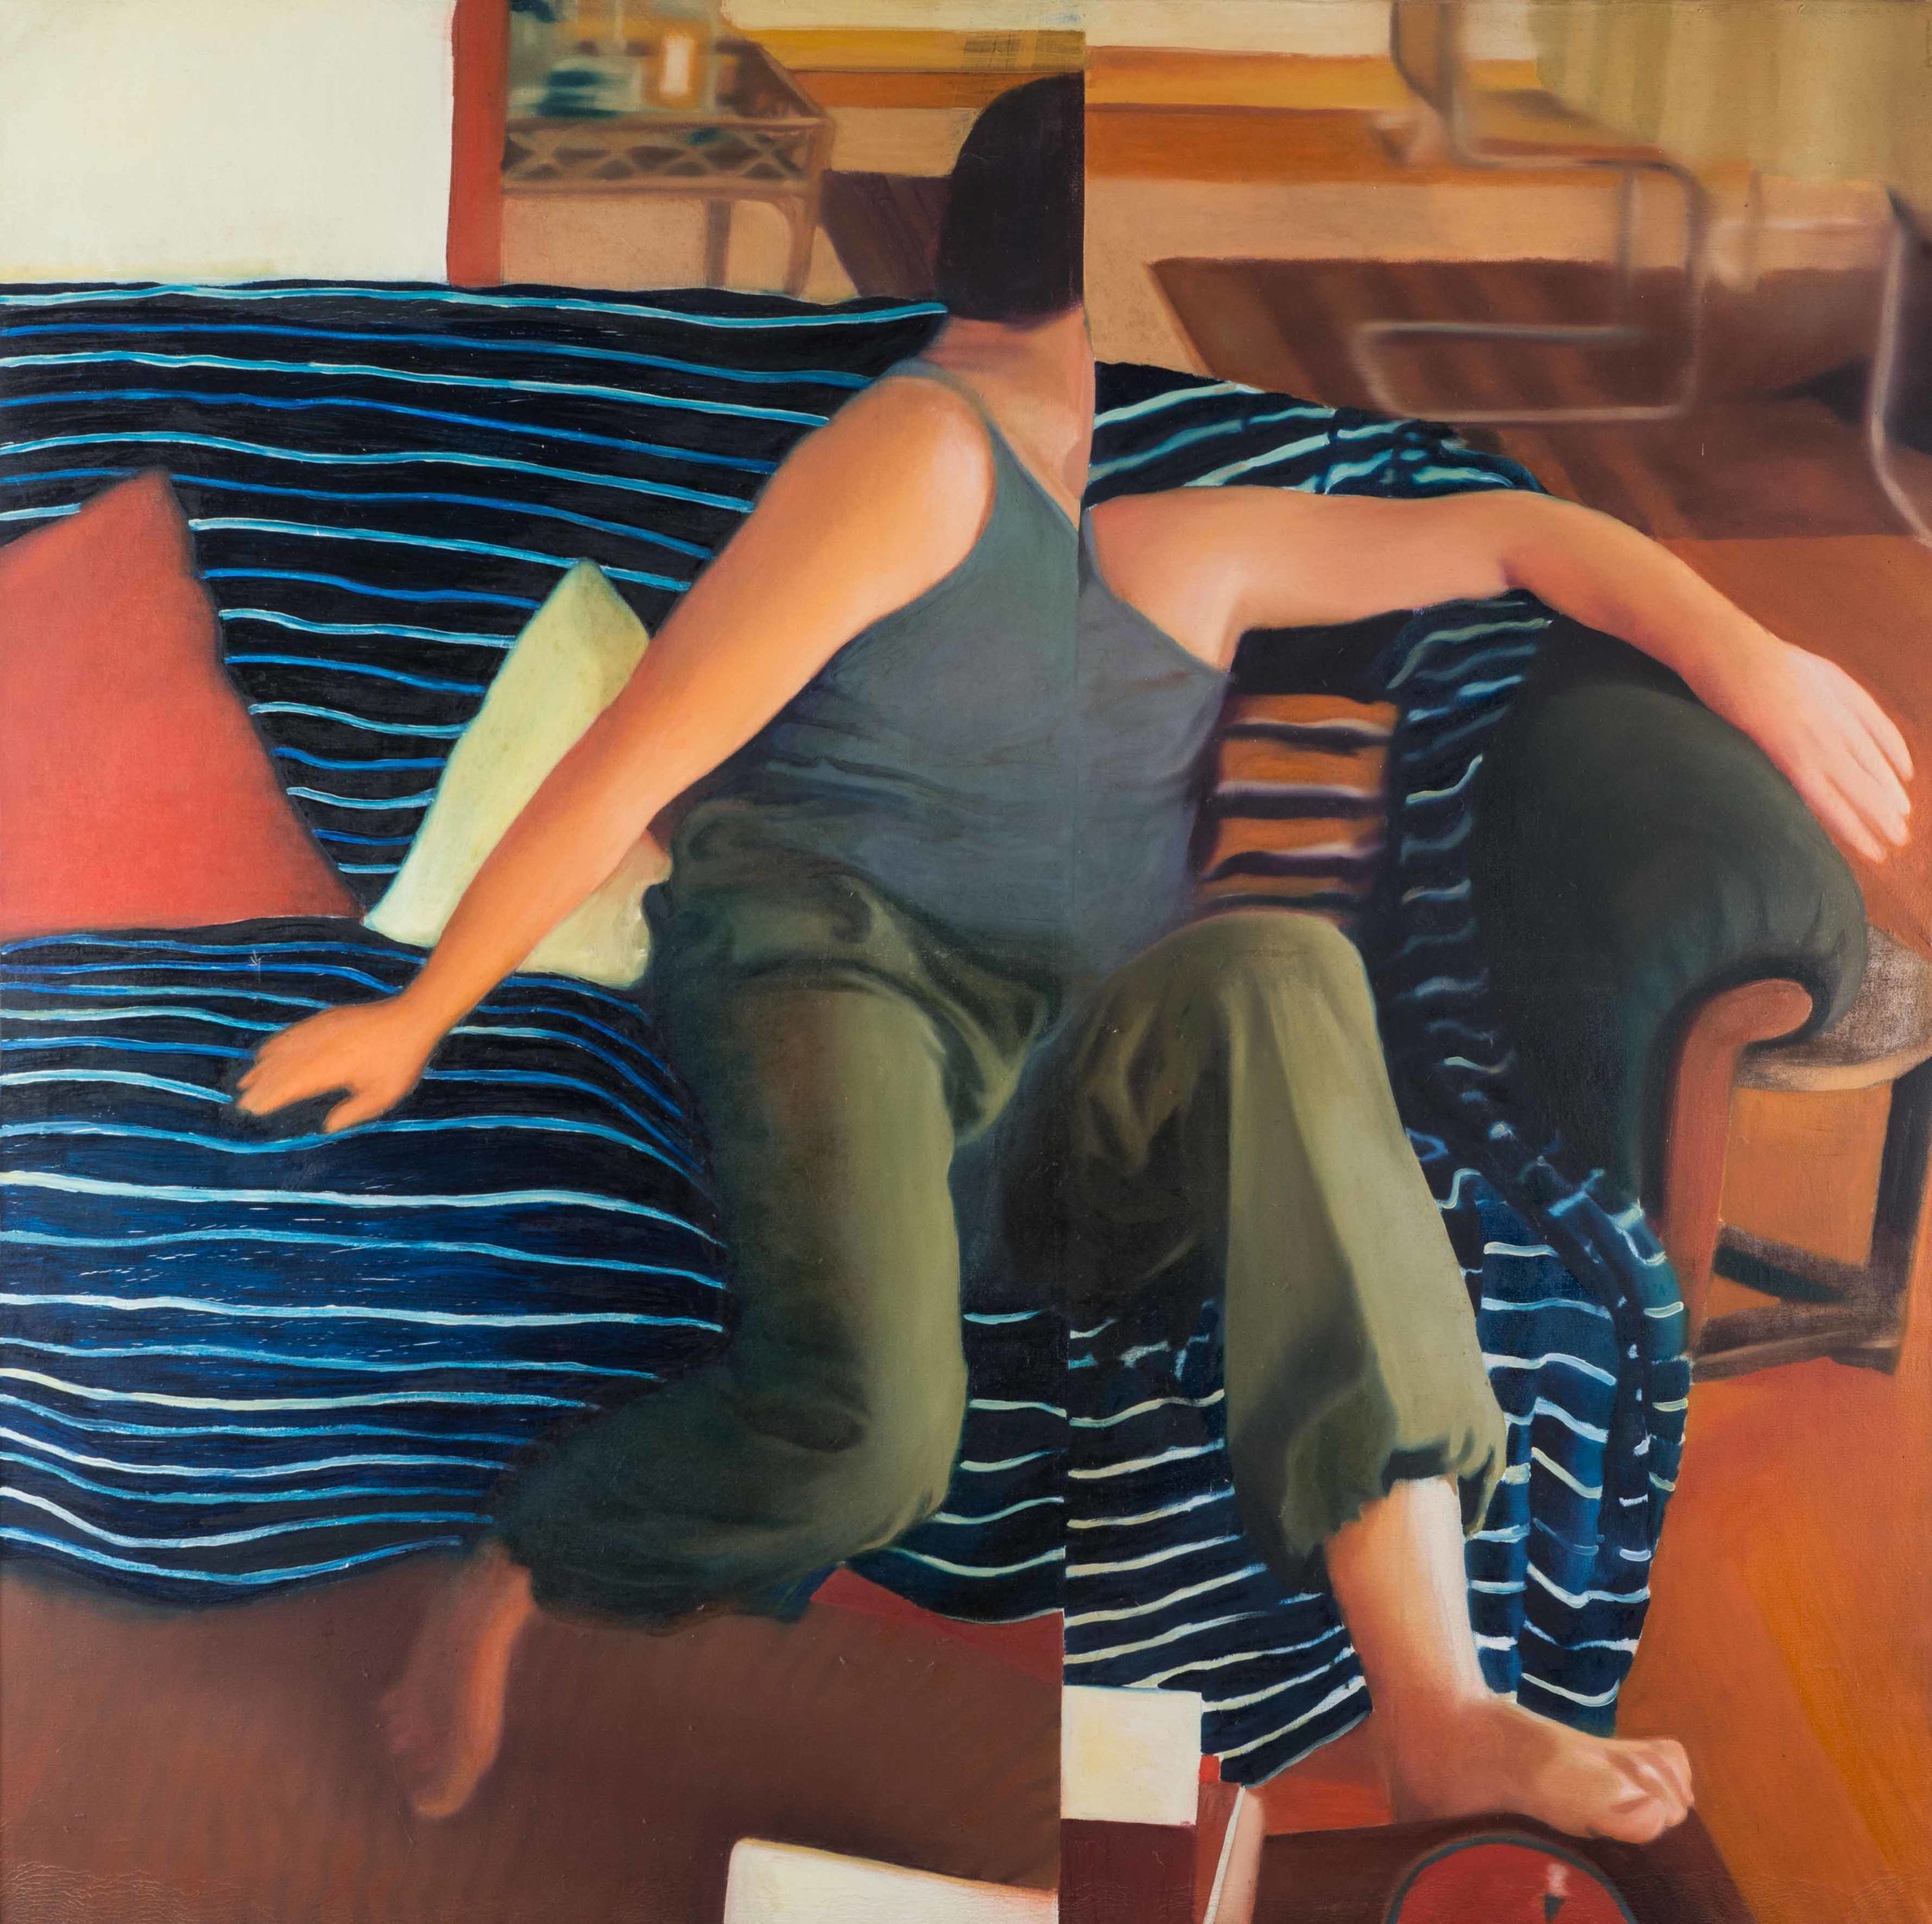   Half brother , 2001, oil on canvas, 110 x 140cm. Private collection, Brazil 